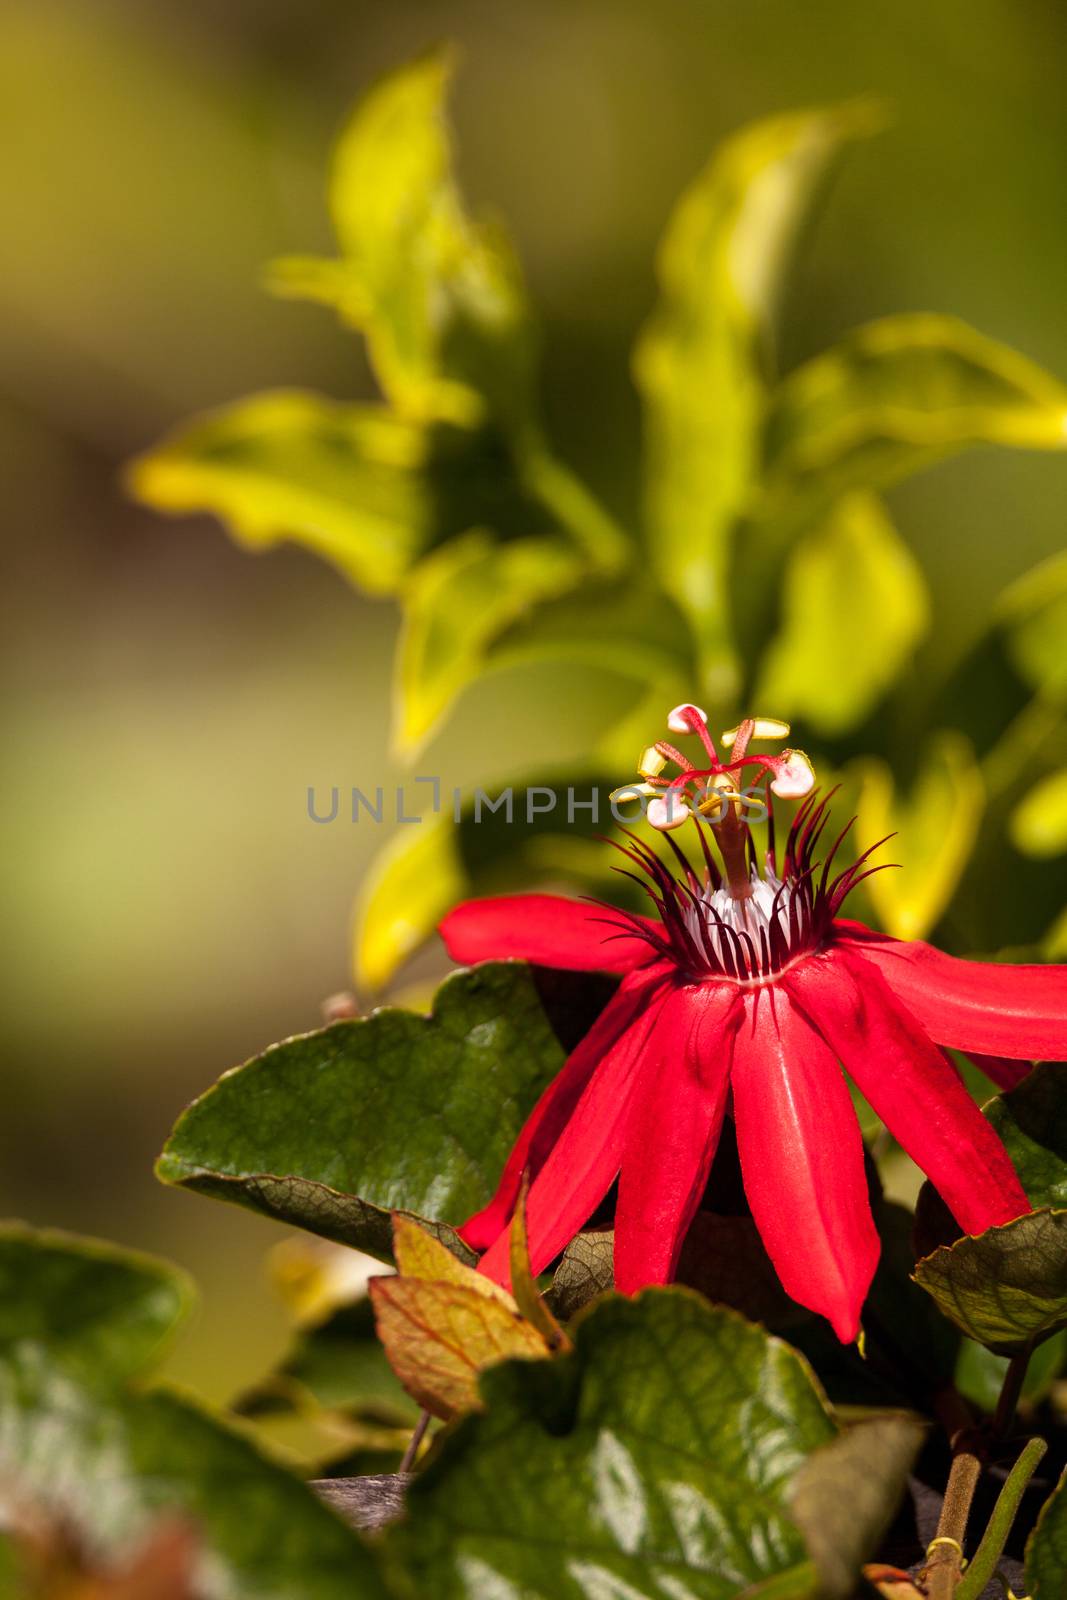 Scarlet flame red passionflower called Passiflora miniata blooms on a vine in Southern Florida